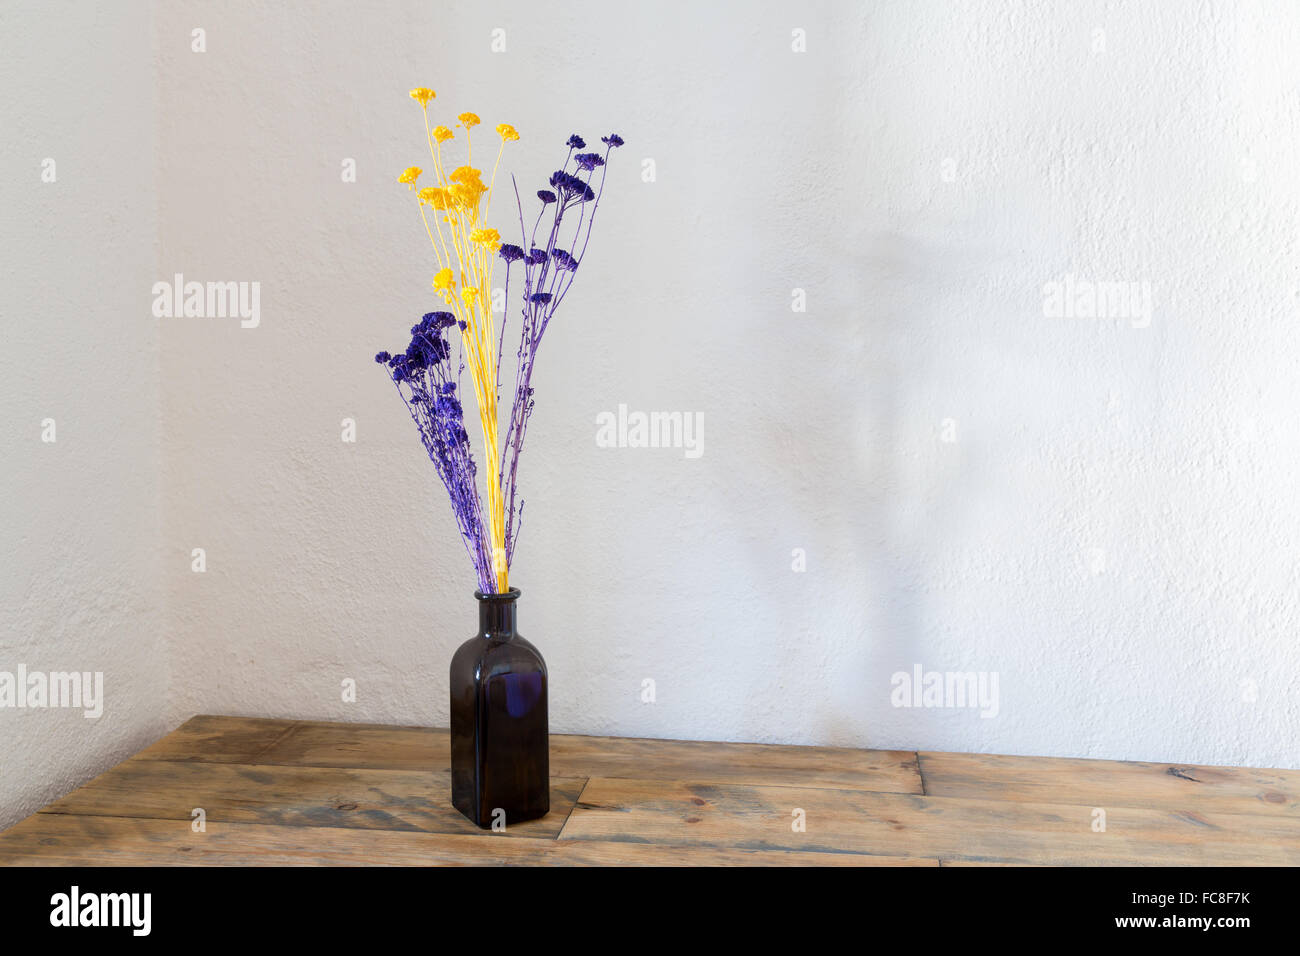 Dried flowers in blue bottle vase on wood Stock Photo